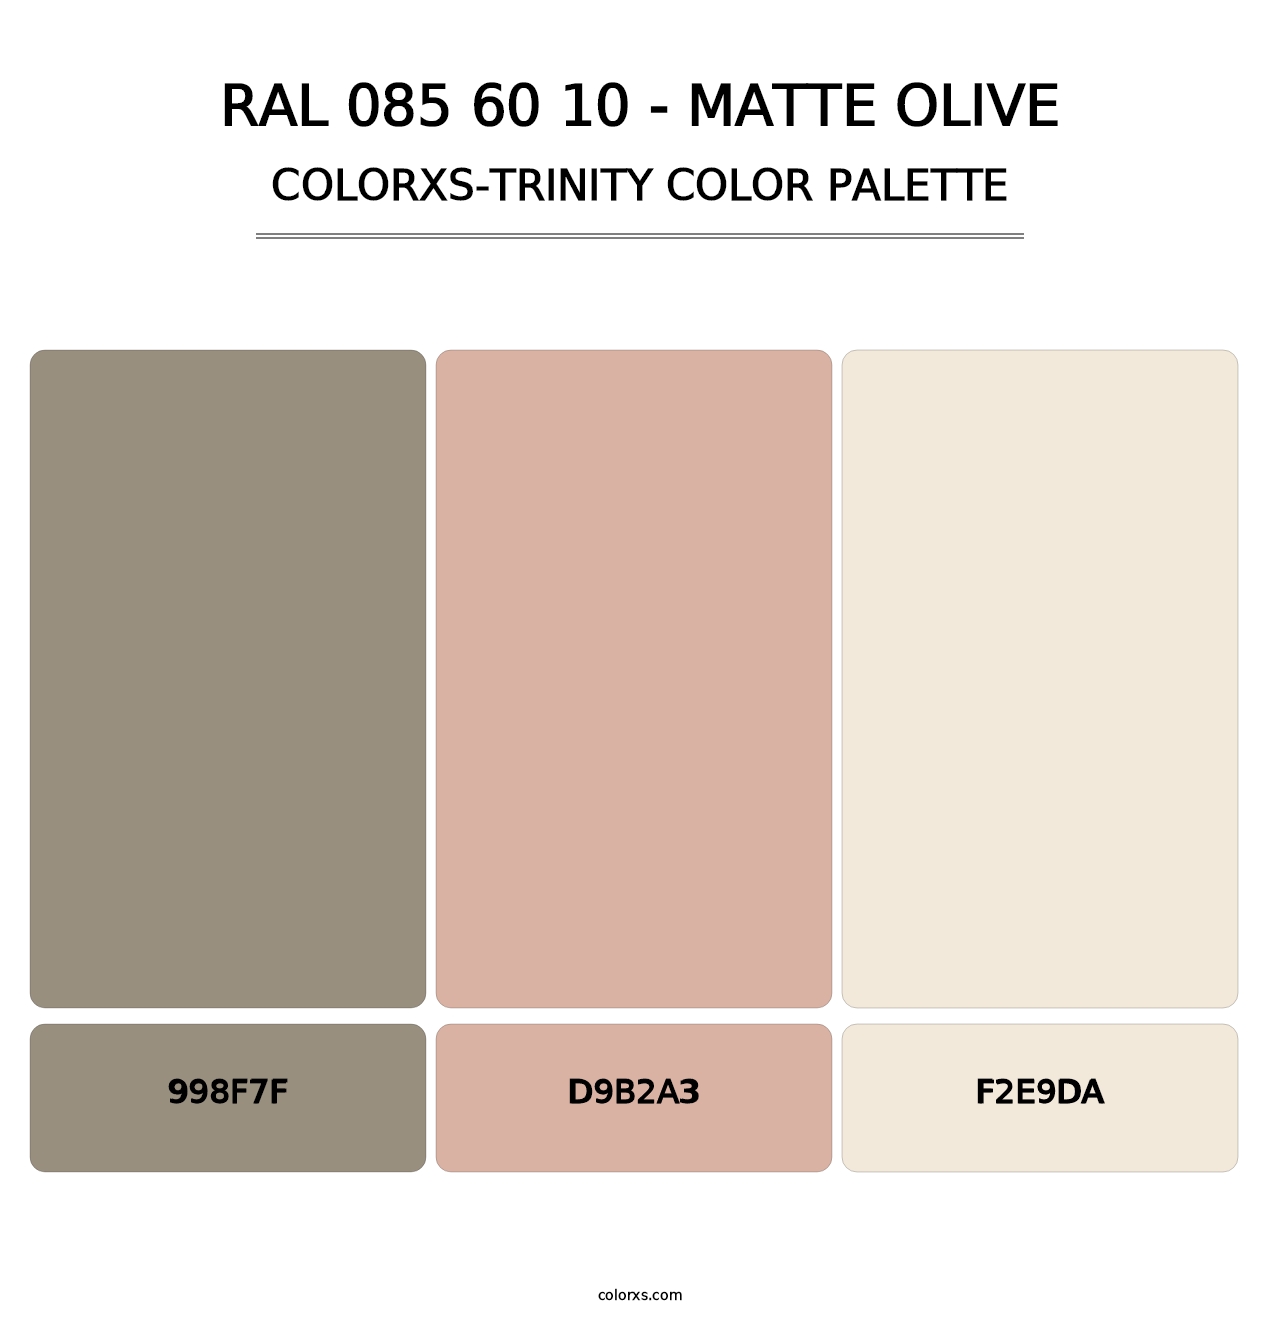 RAL 085 60 10 - Matte Olive - Colorxs Trinity Palette